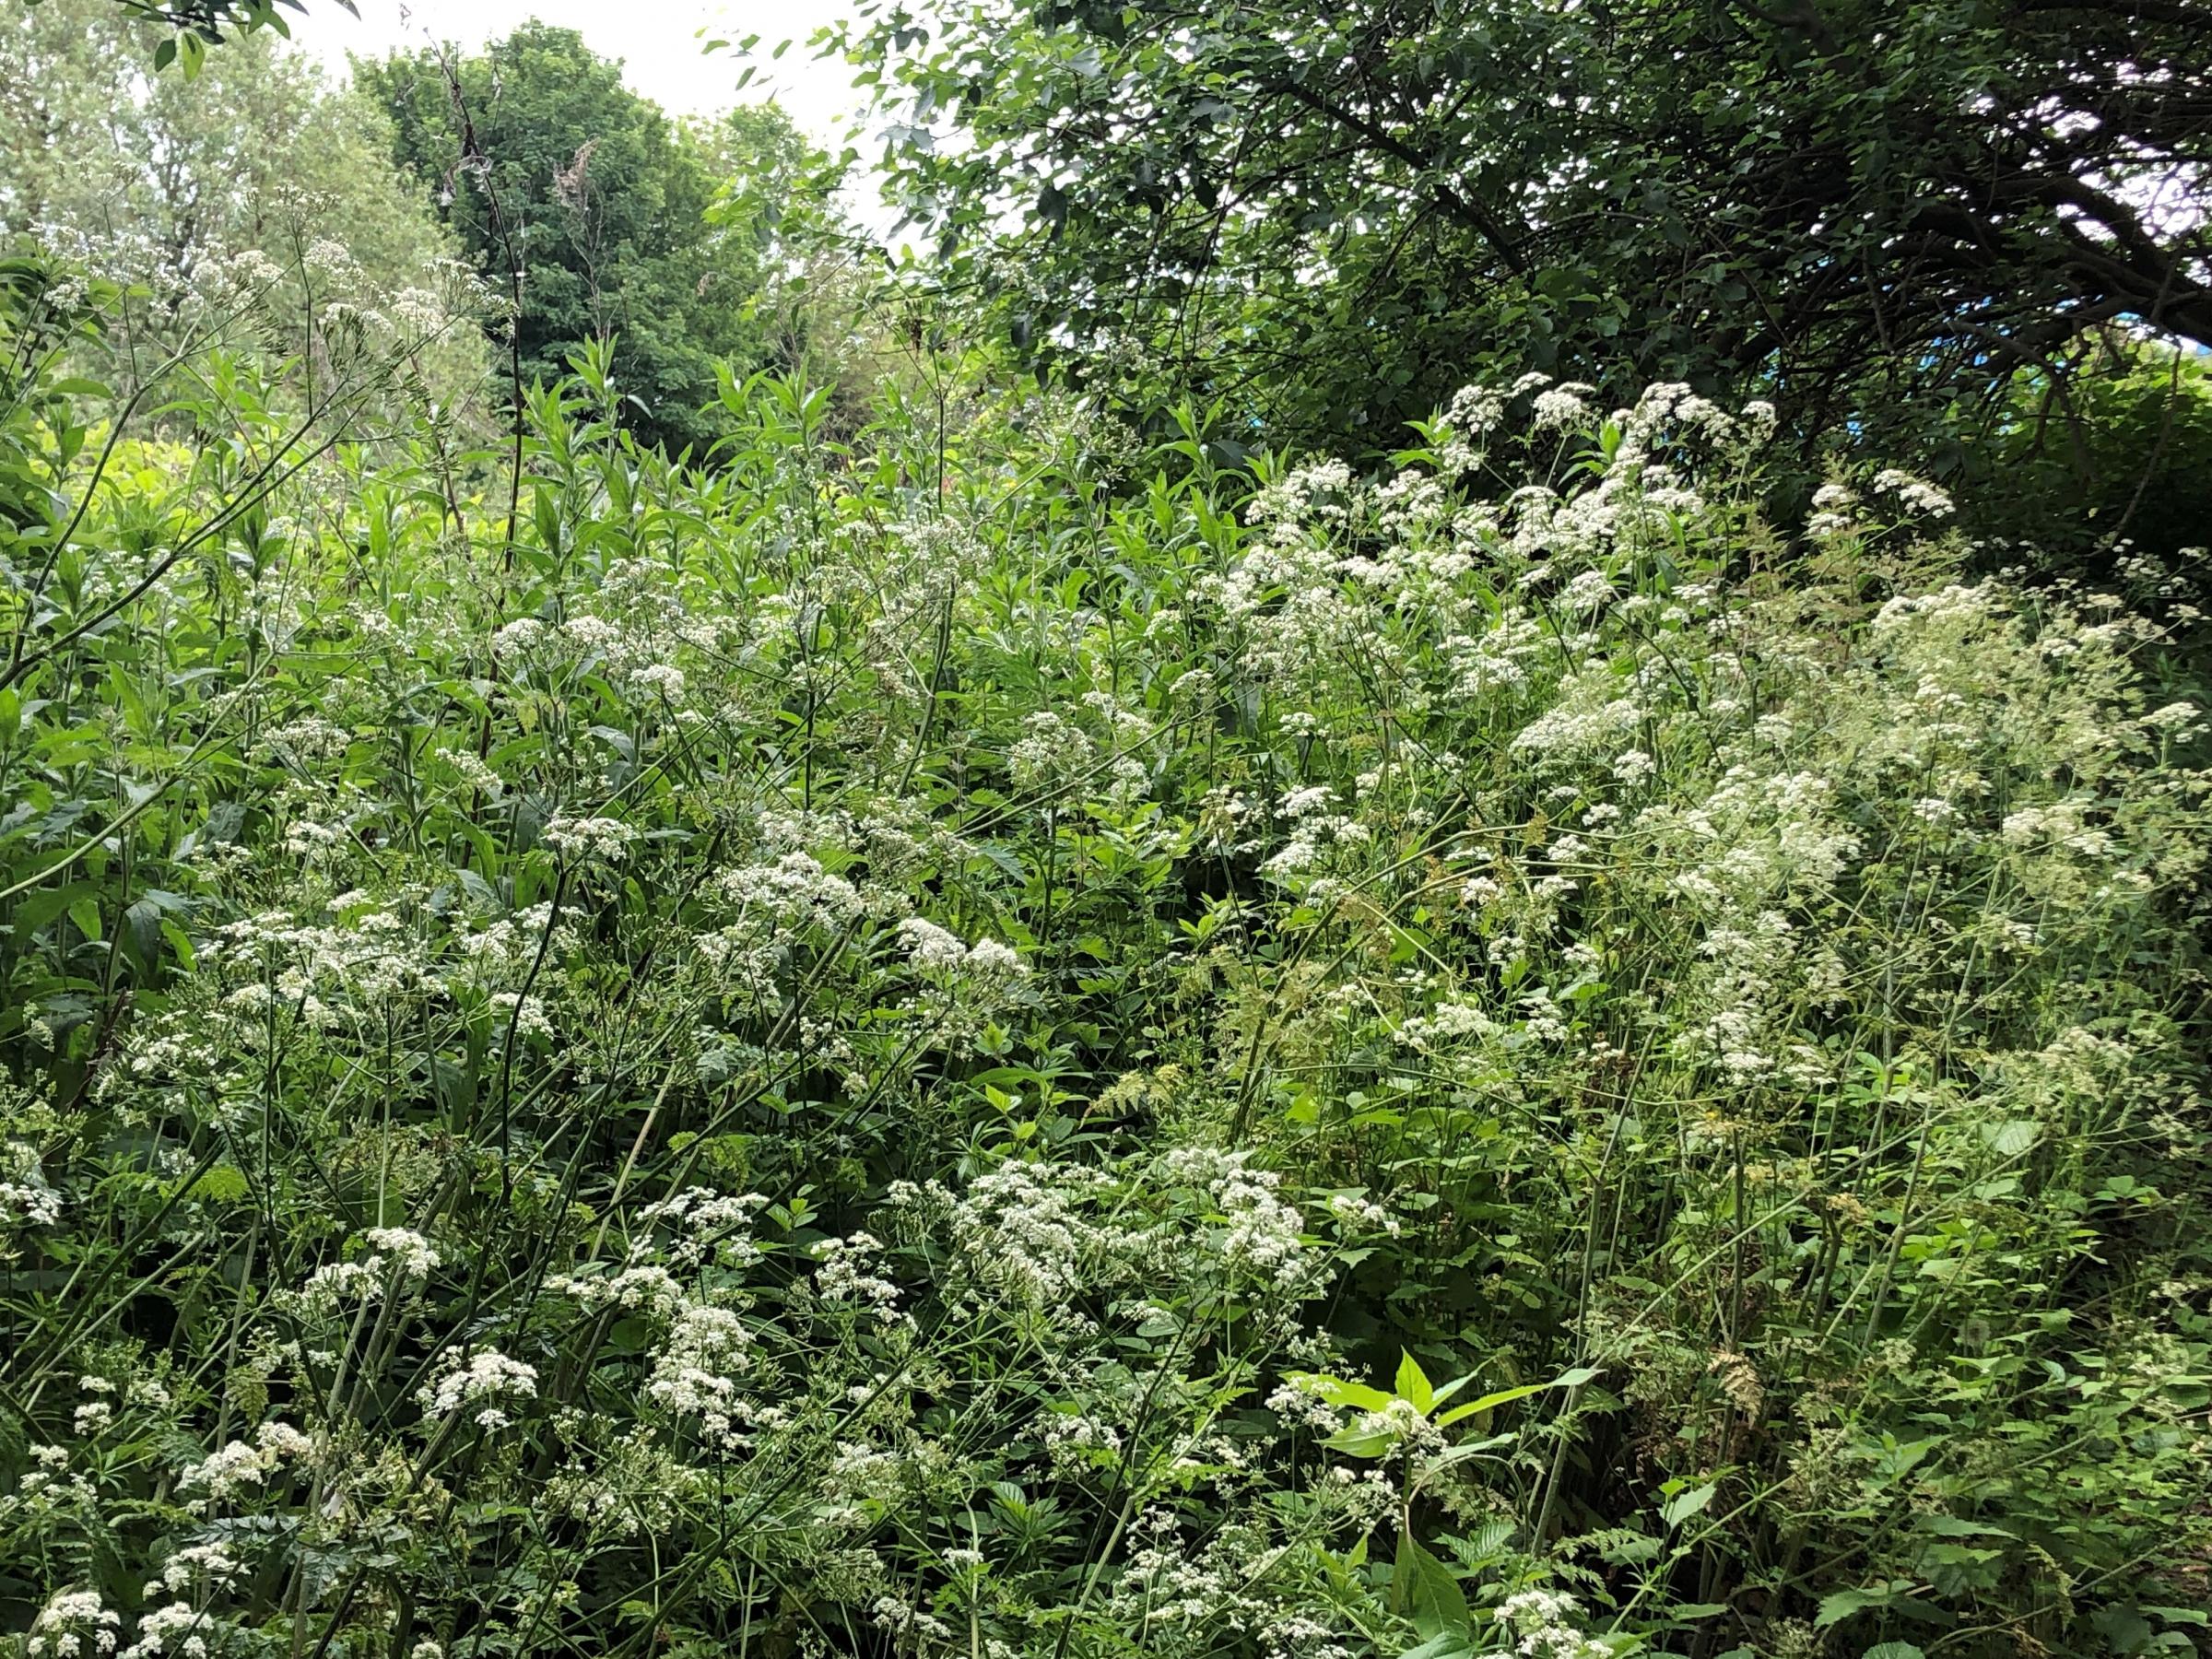 Walkers have reported what they thought was giant hogweed